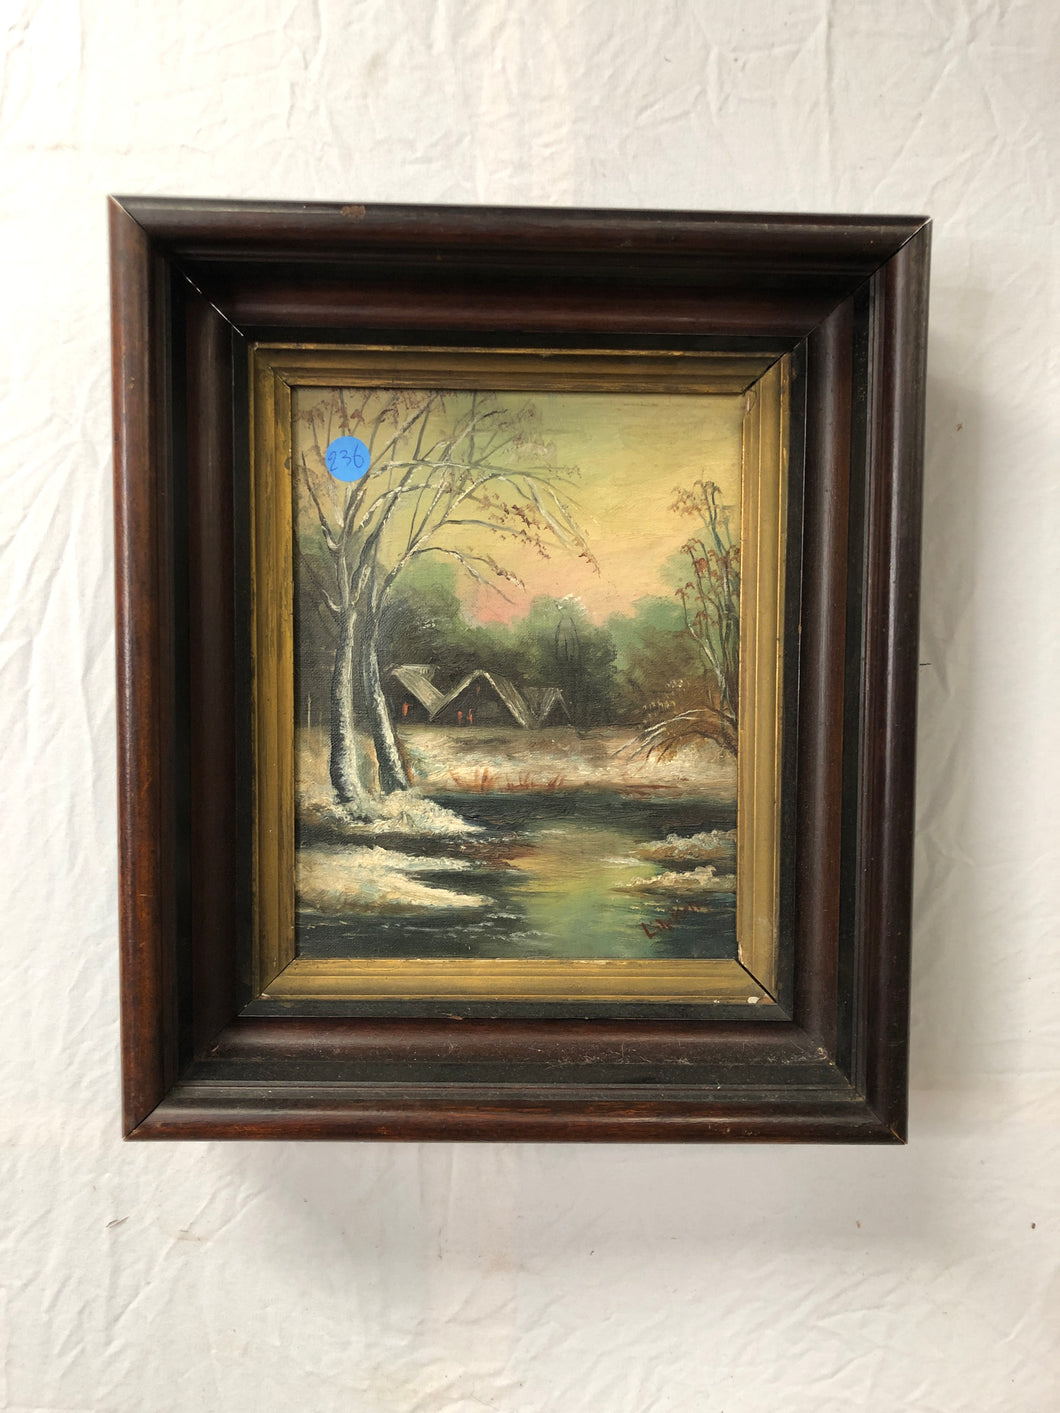 Original Oil on Canvas, Signed on the Bottom